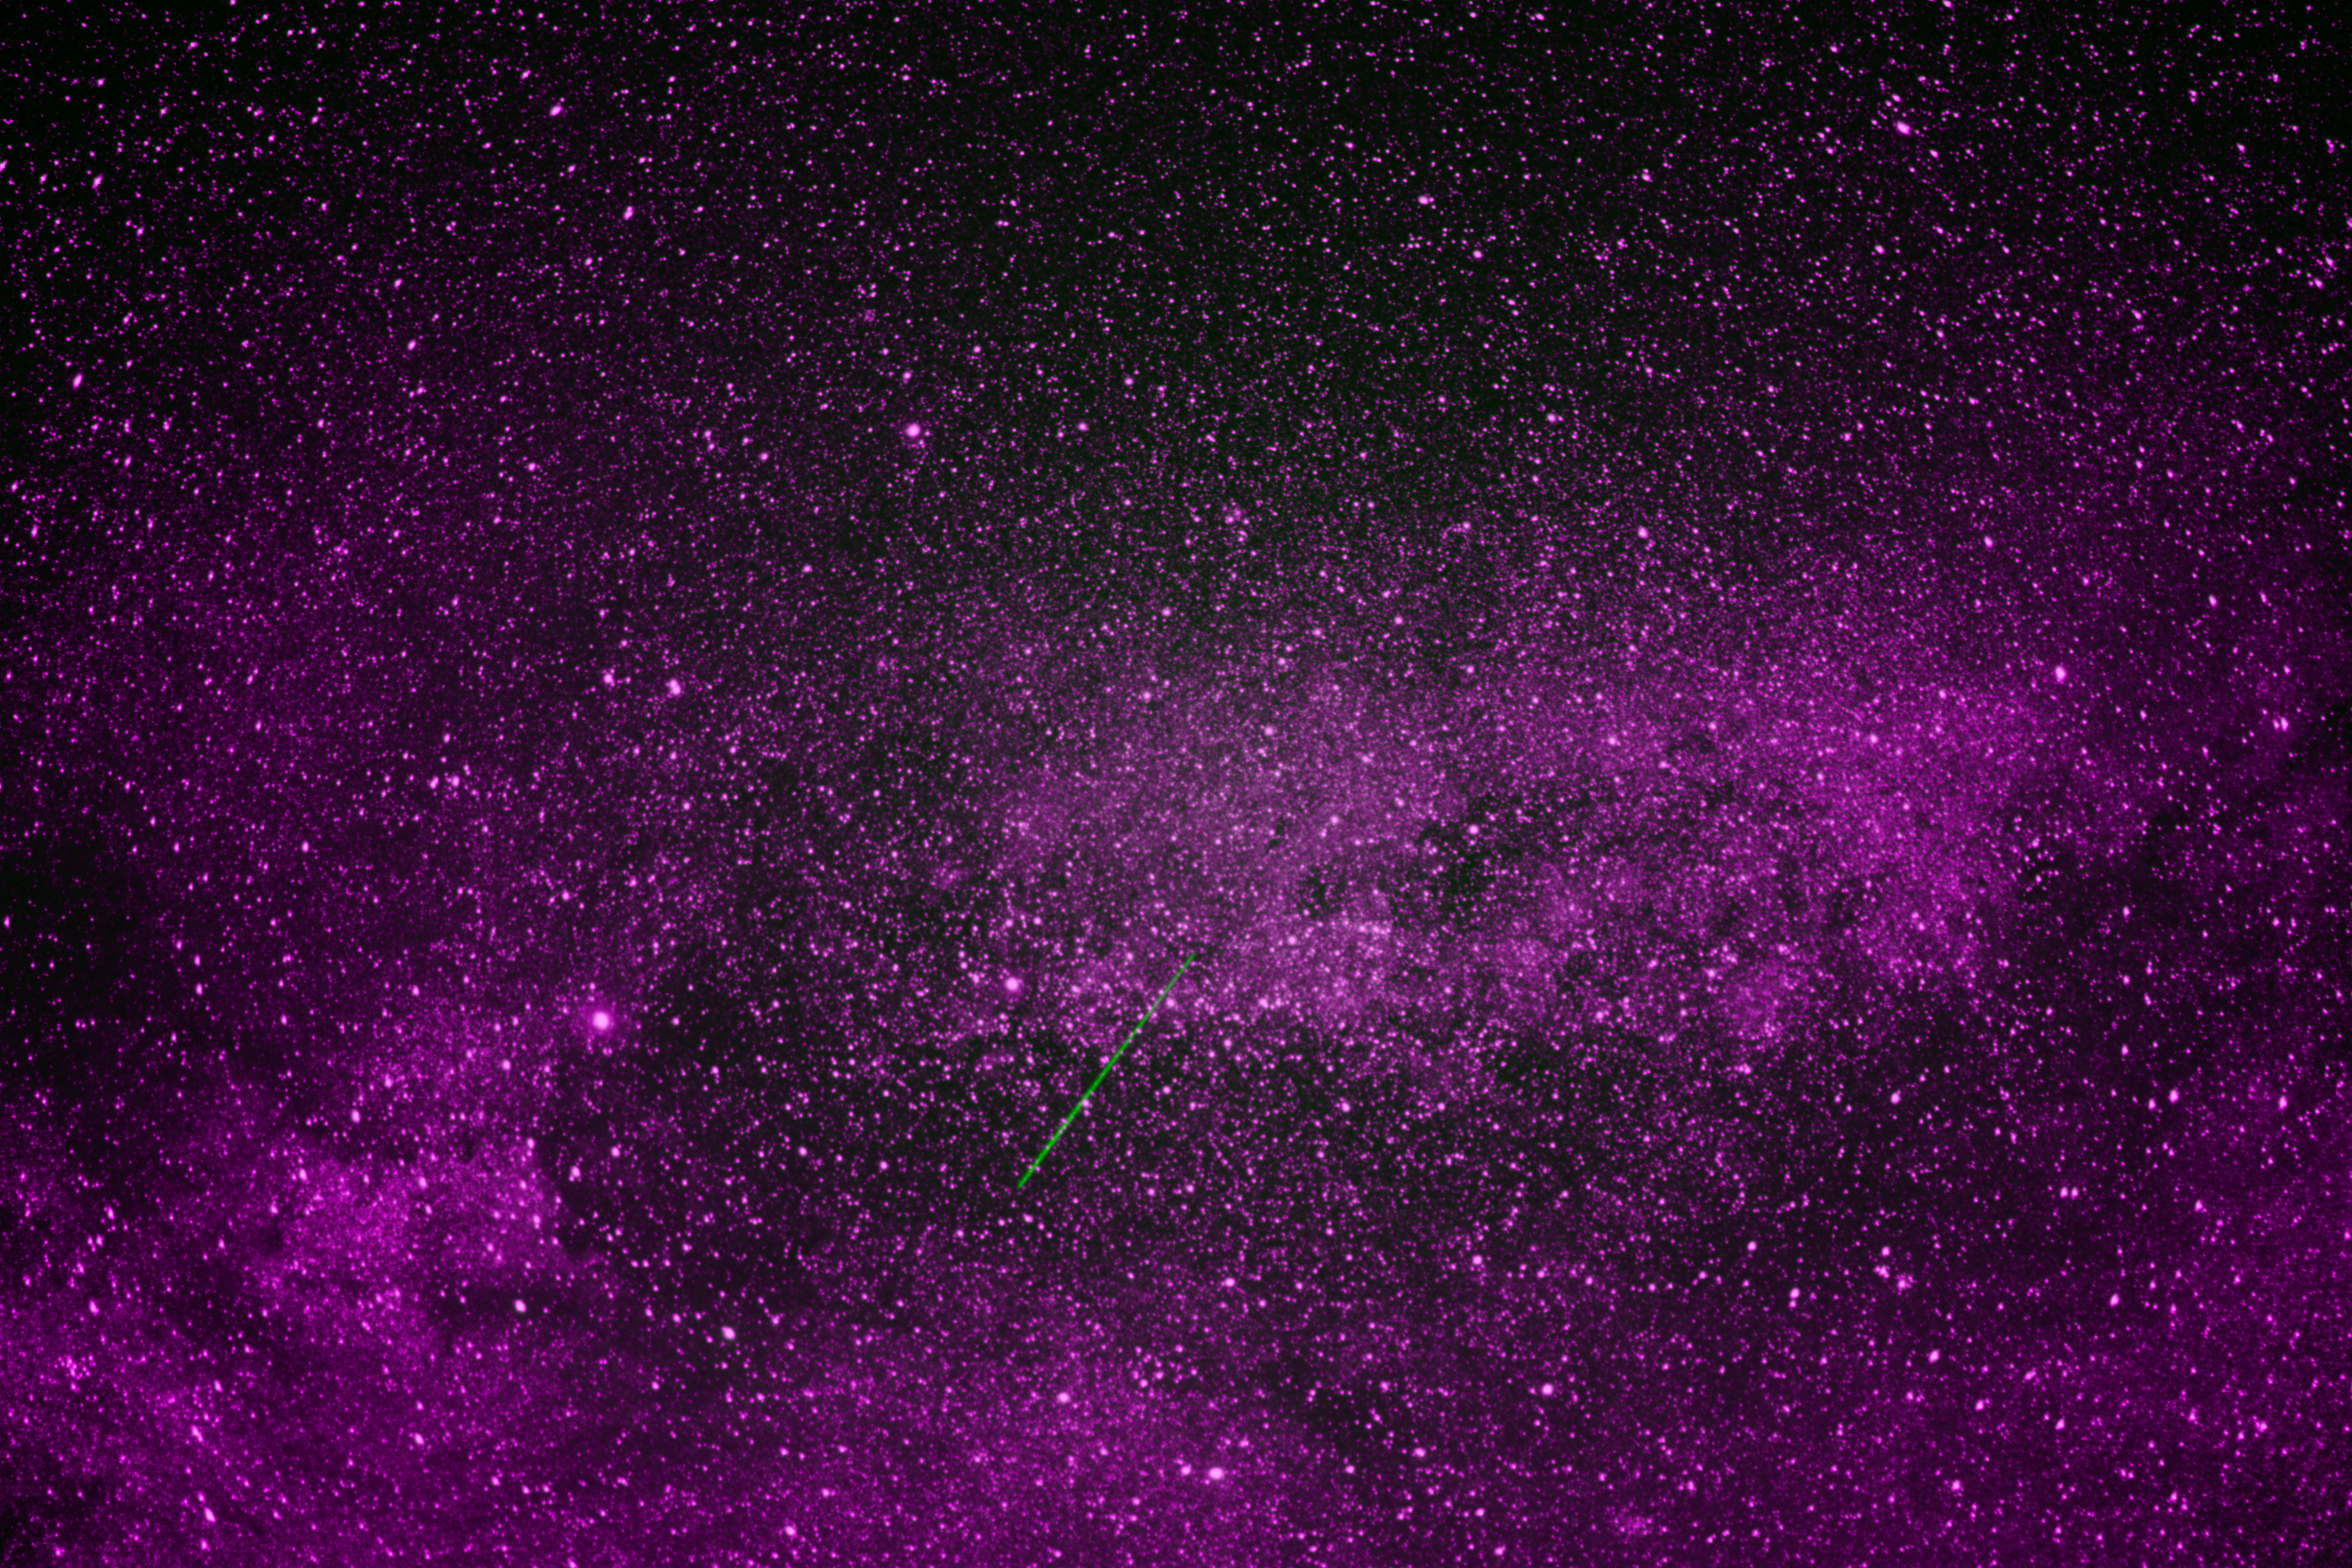 130959 download wallpaper universe, purple, stars, violet, starfall screensavers and pictures for free